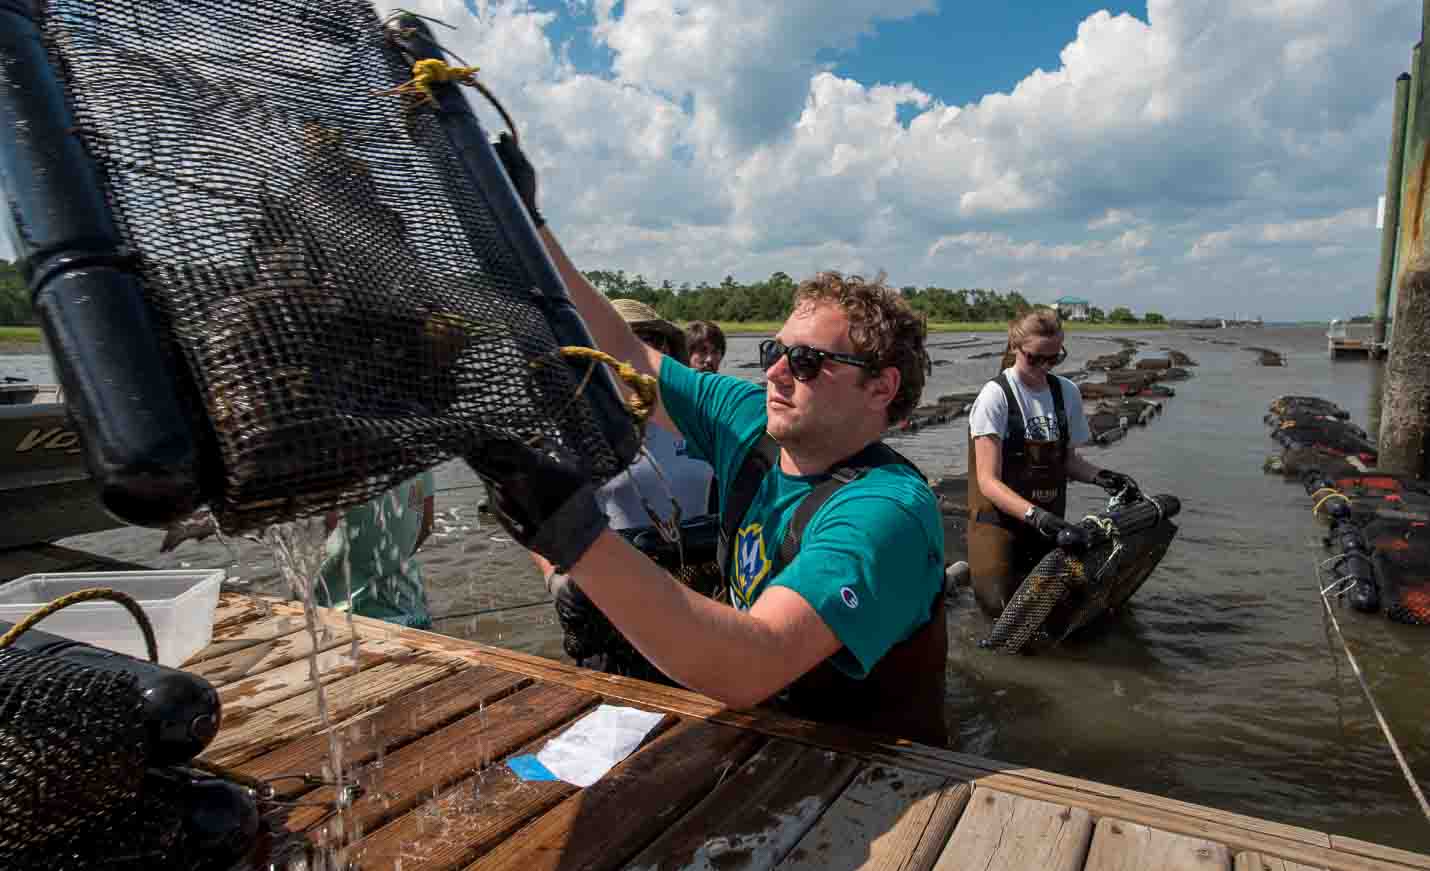 Students placing crates of oysters in the waterway to create a farm